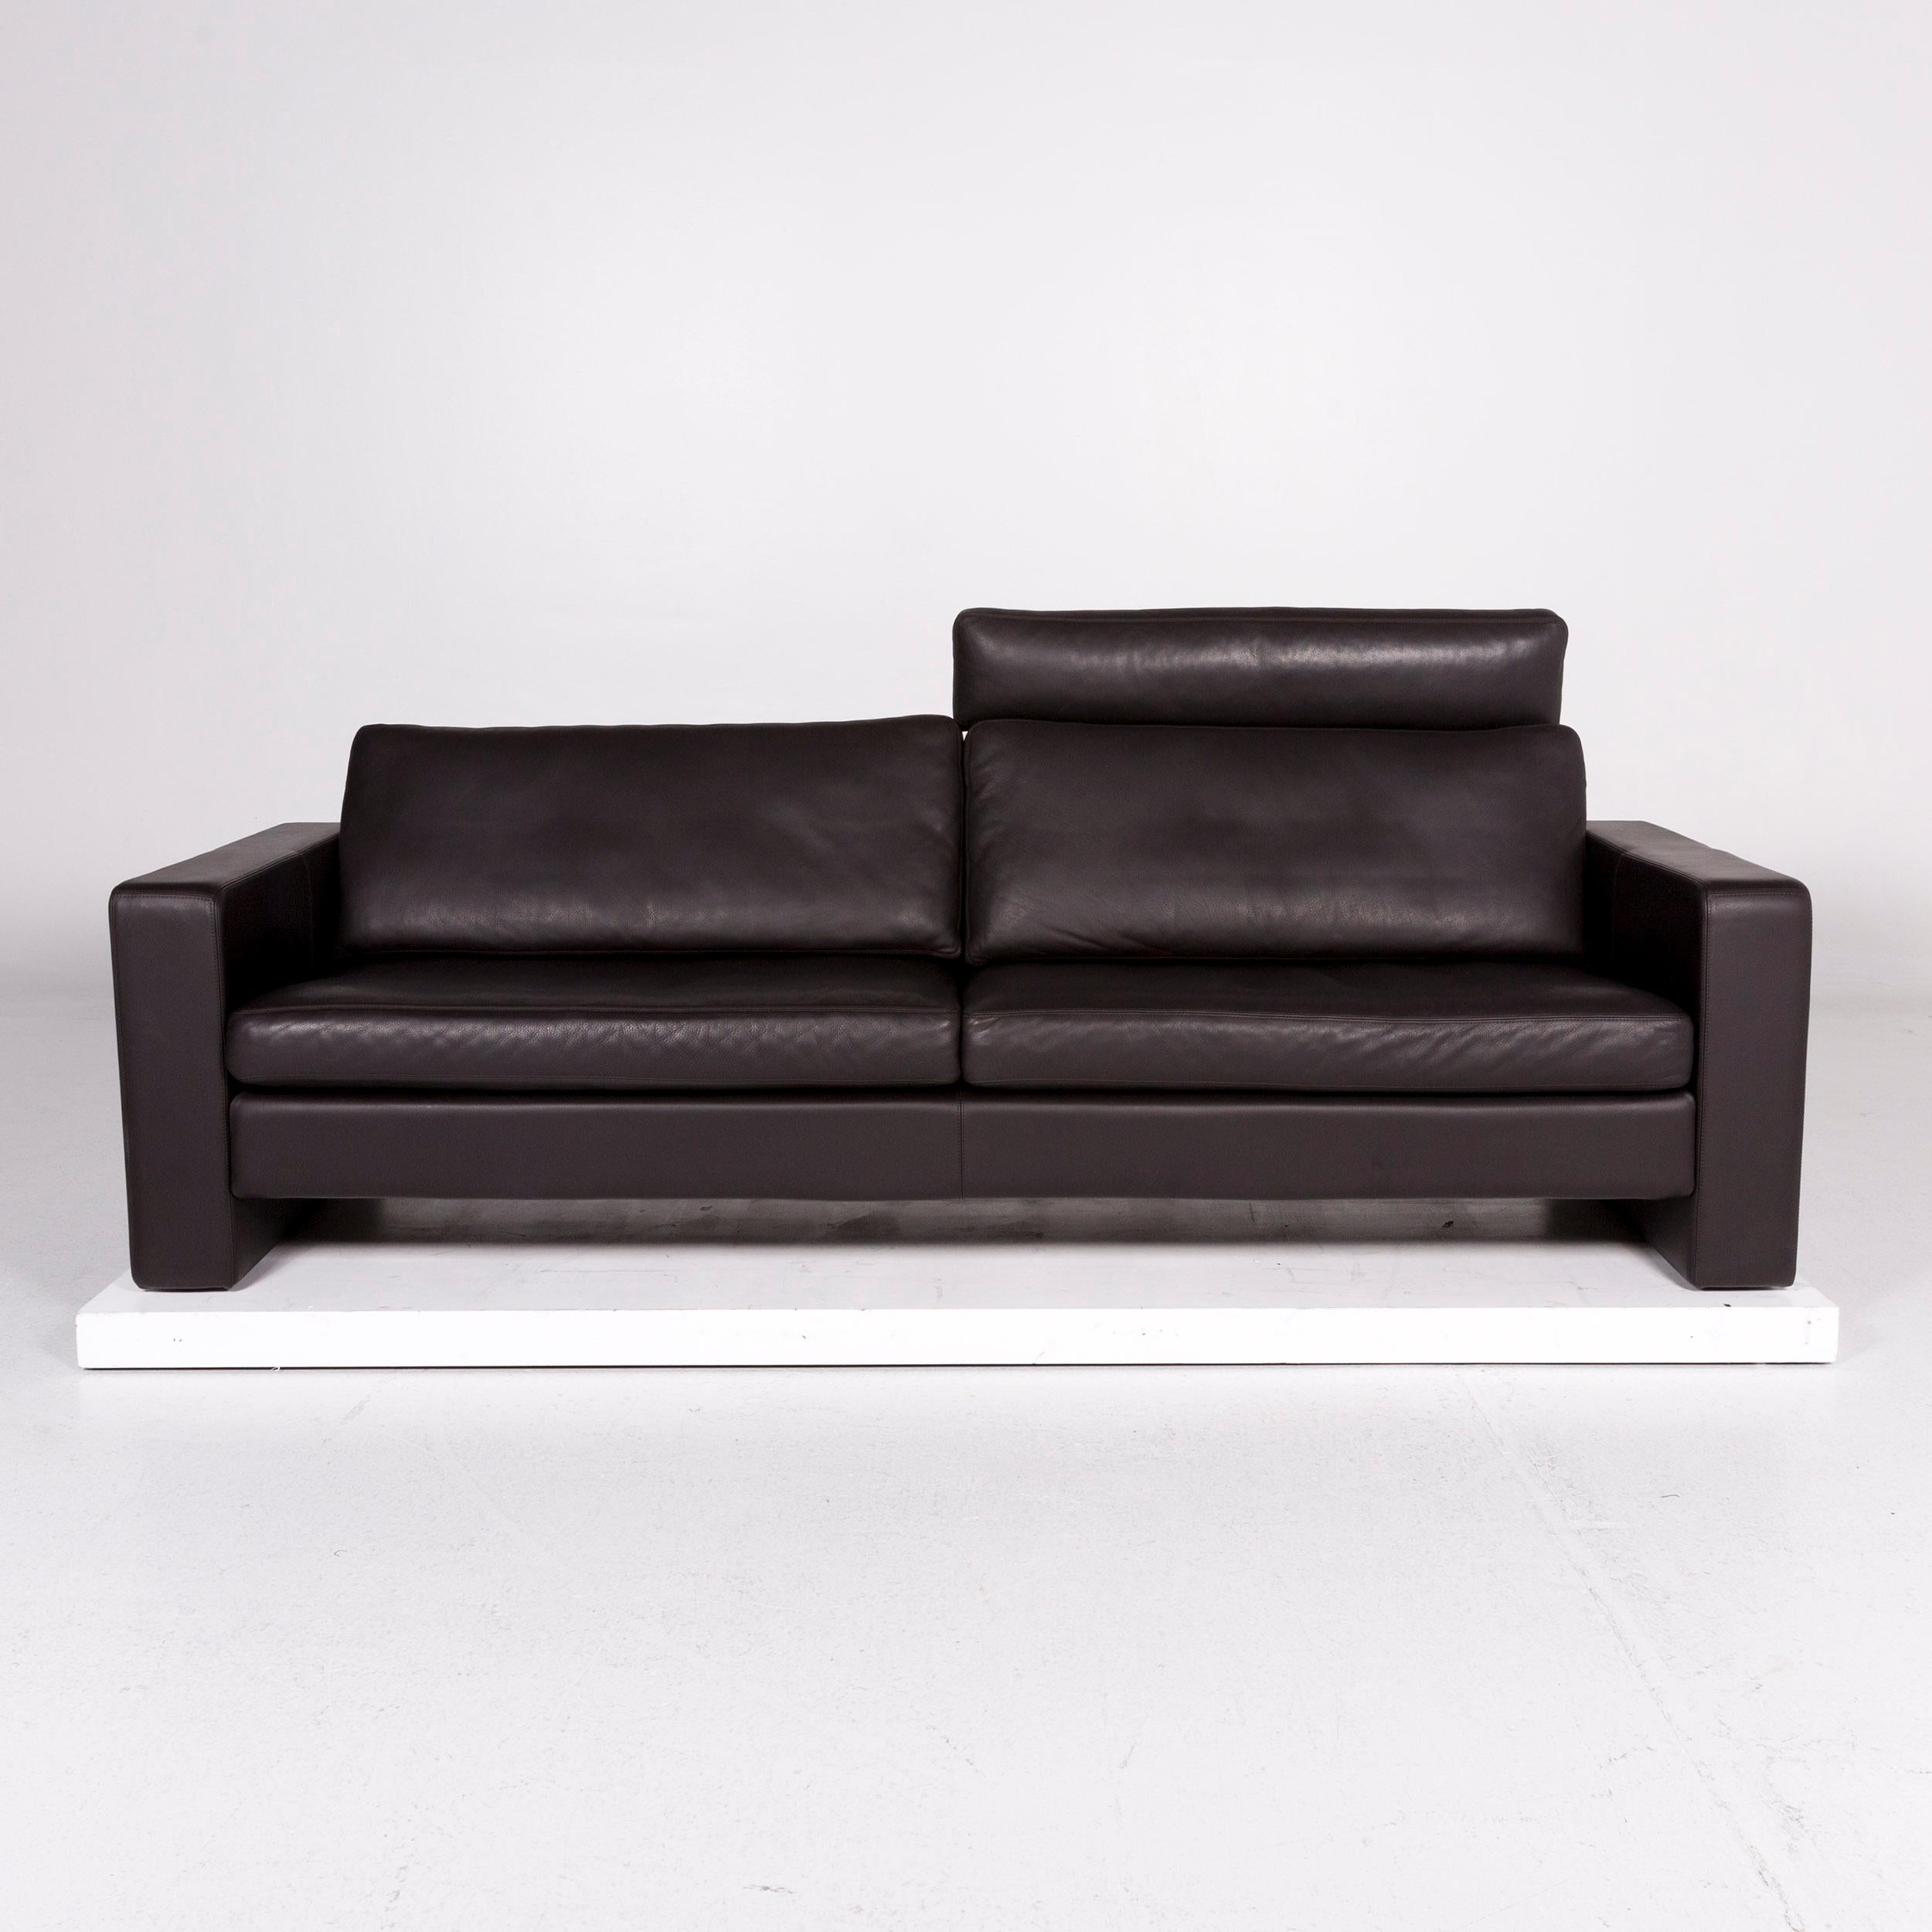 We bring to you a COR conseta leather sofa brown dark brown three-seat couch.
   
 
 Product measurements in centimeters:
 
Depth 88
Width 243
Height 77
Seat-height 44
Rest-height 60
Seat-depth 52
Seat-width 209
Back-height 36.